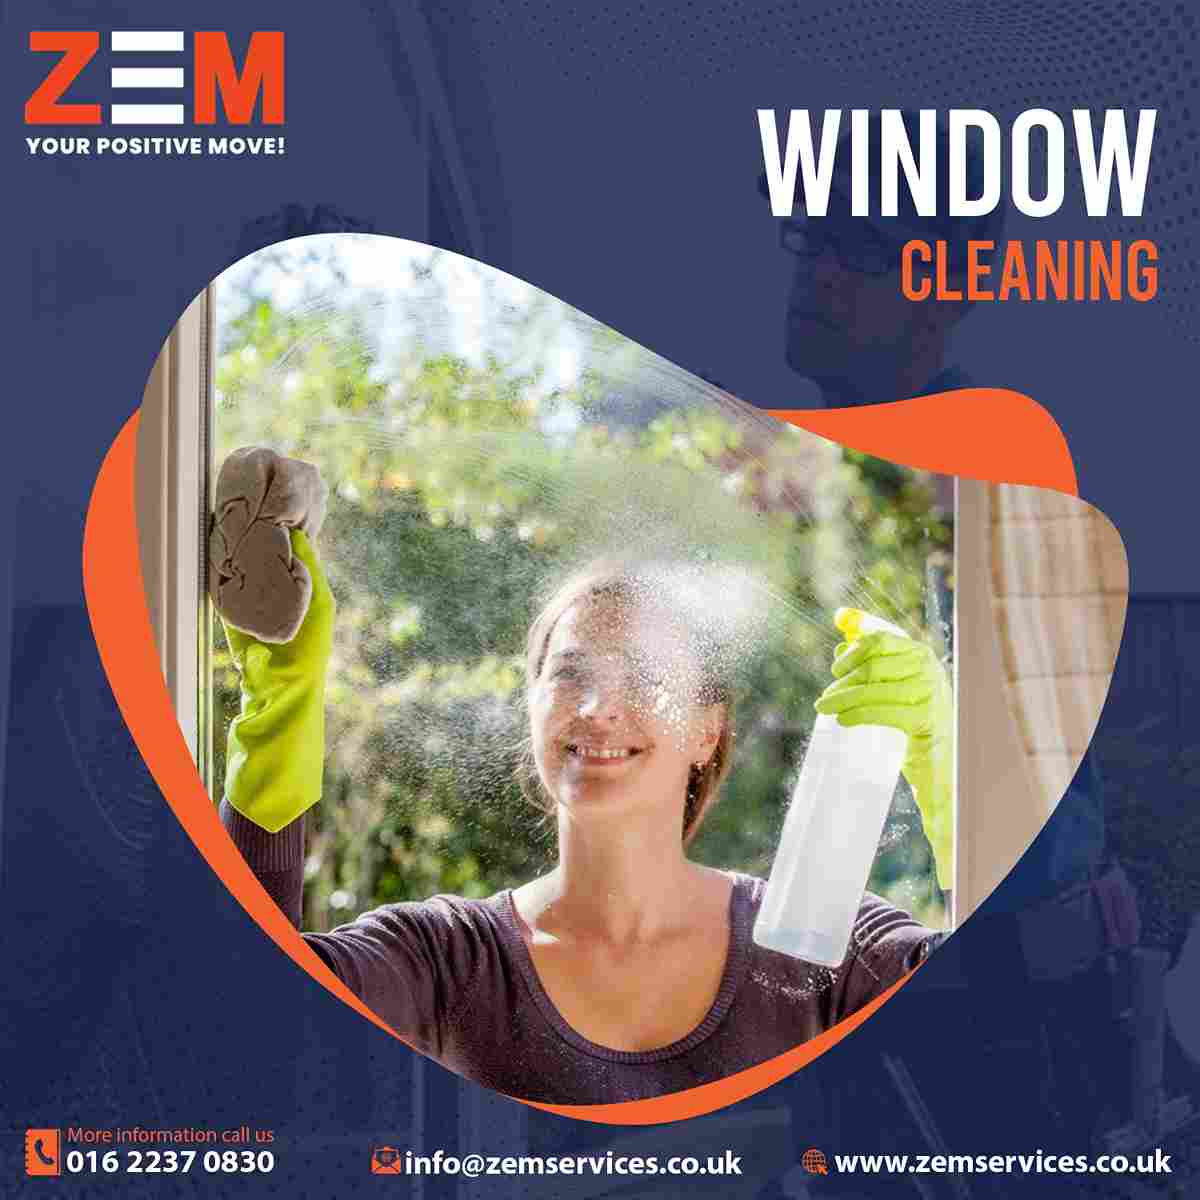 Zem Window CLeaning Services